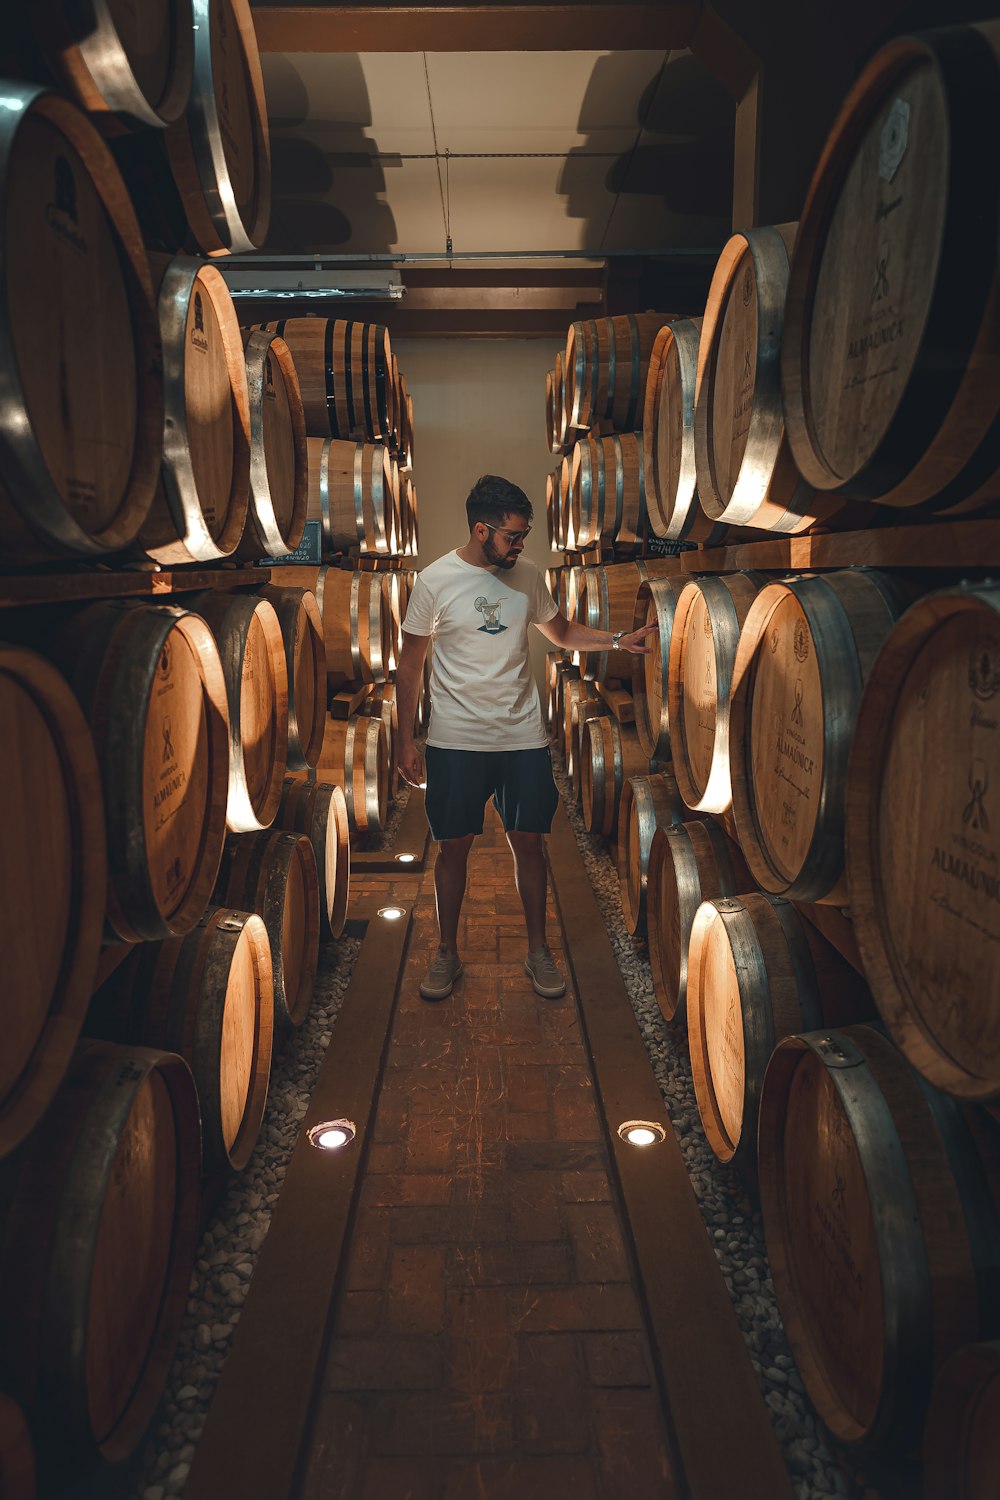 a man standing in a room full of wine barrels